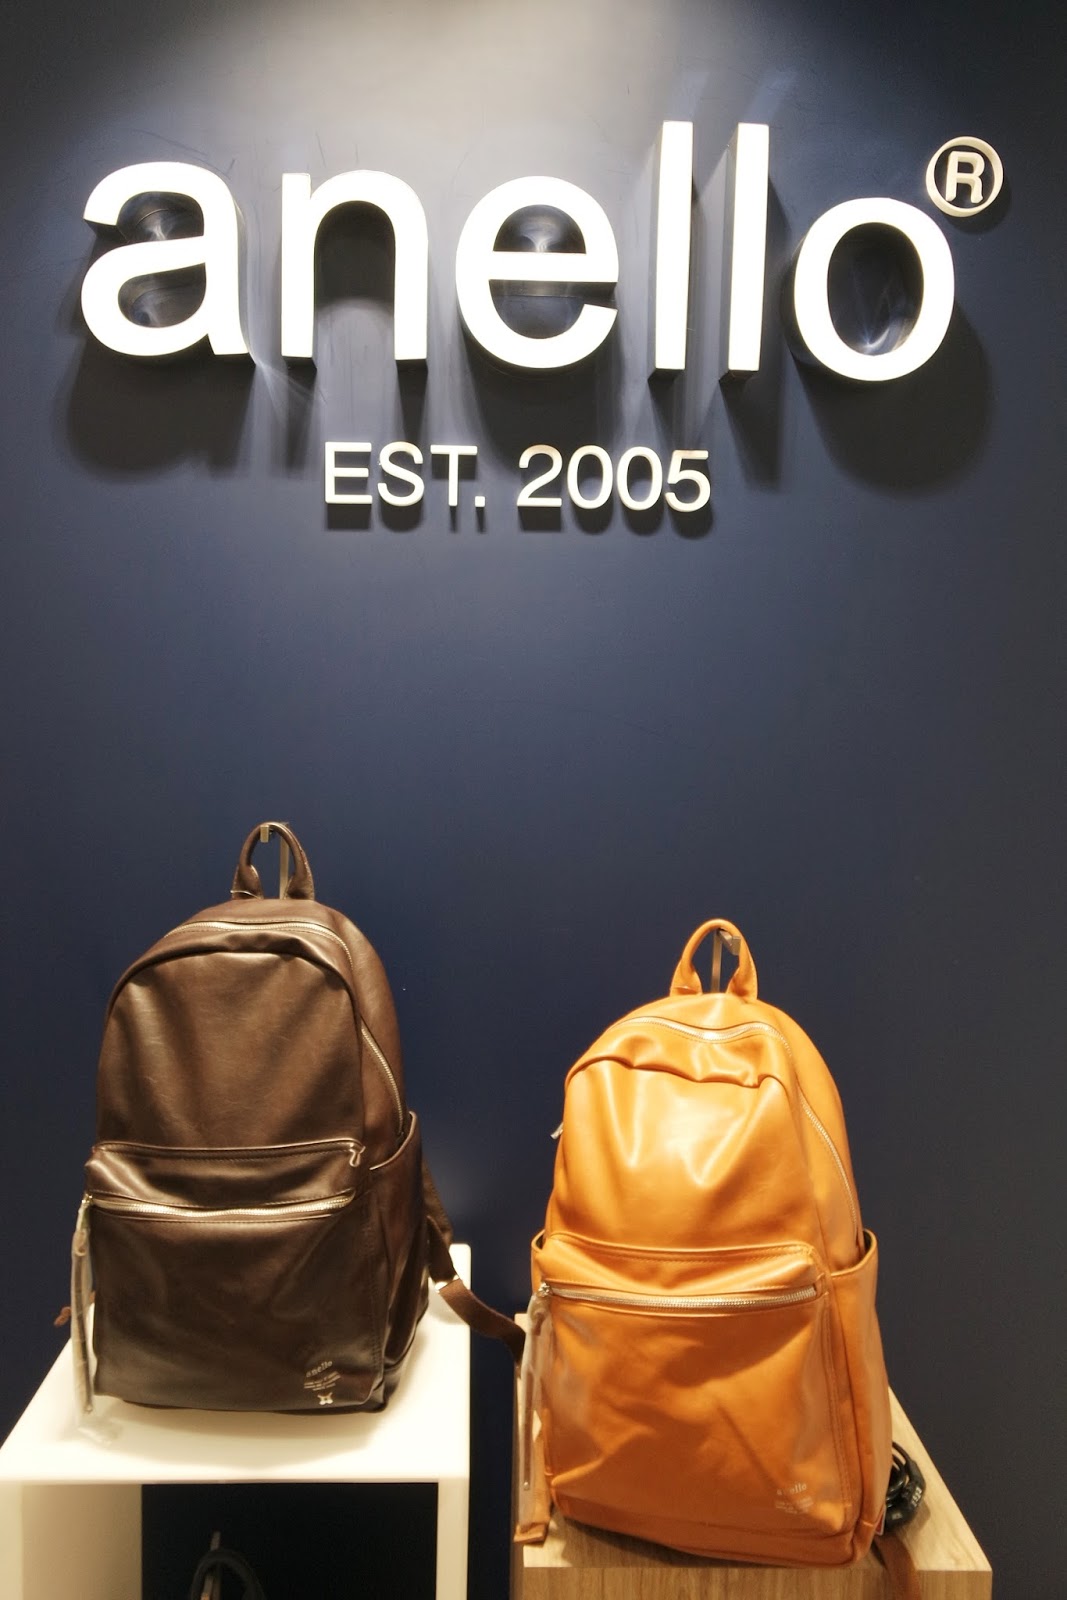 HOW TO FIND OUT IF YOUR - Authentic Anello Bags Japan